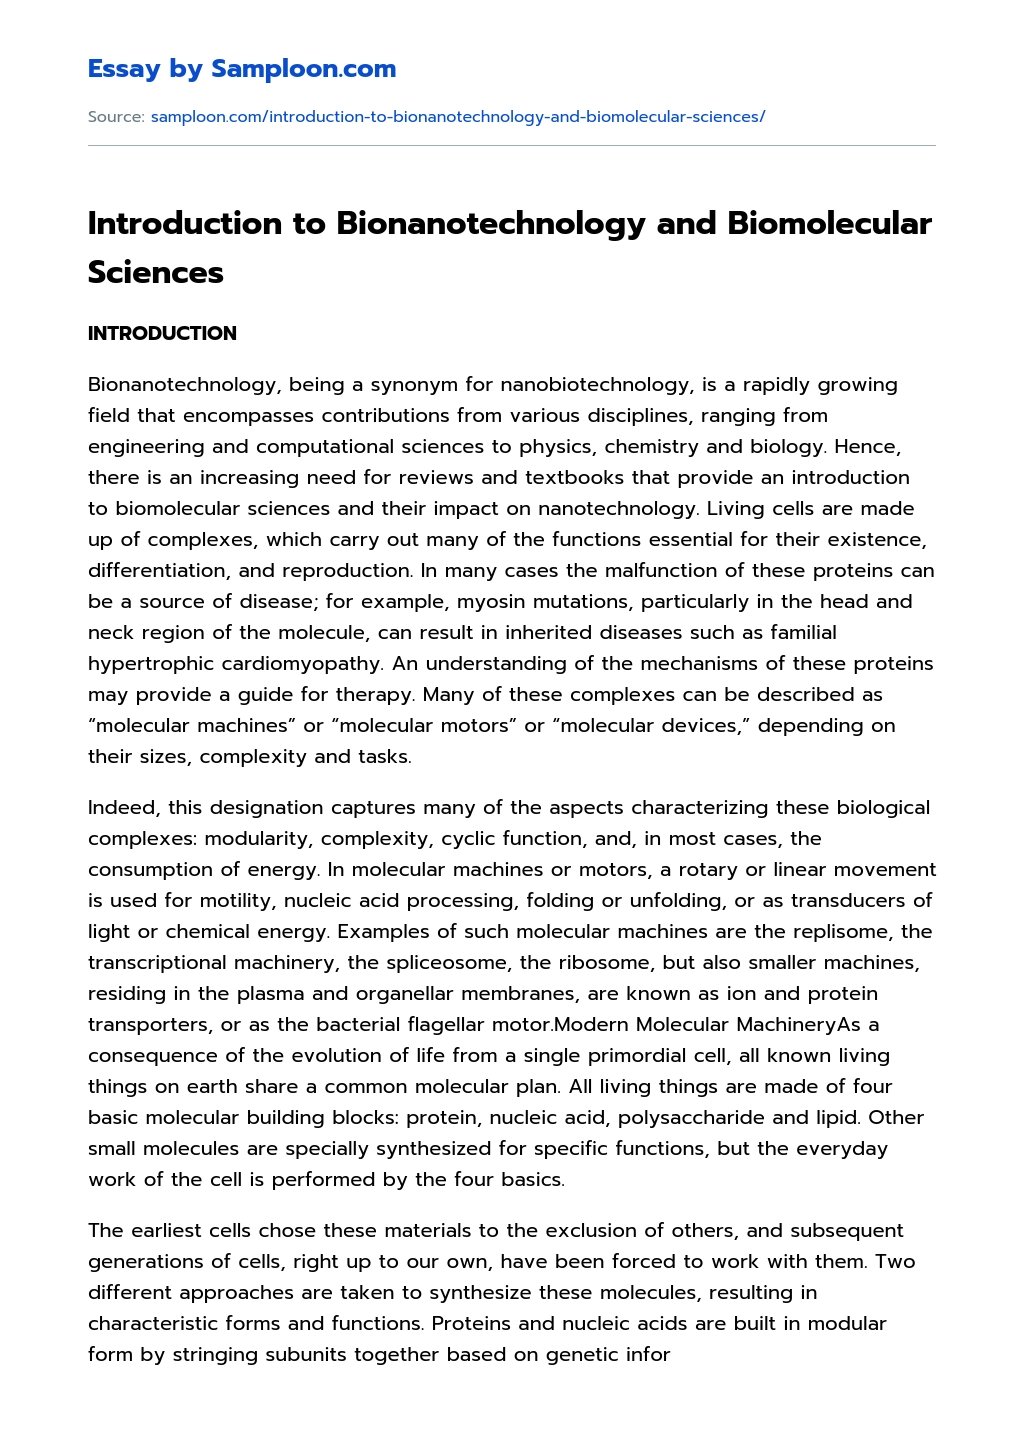 Introduction to Bionanotechnology and Biomolecular Sciences essay